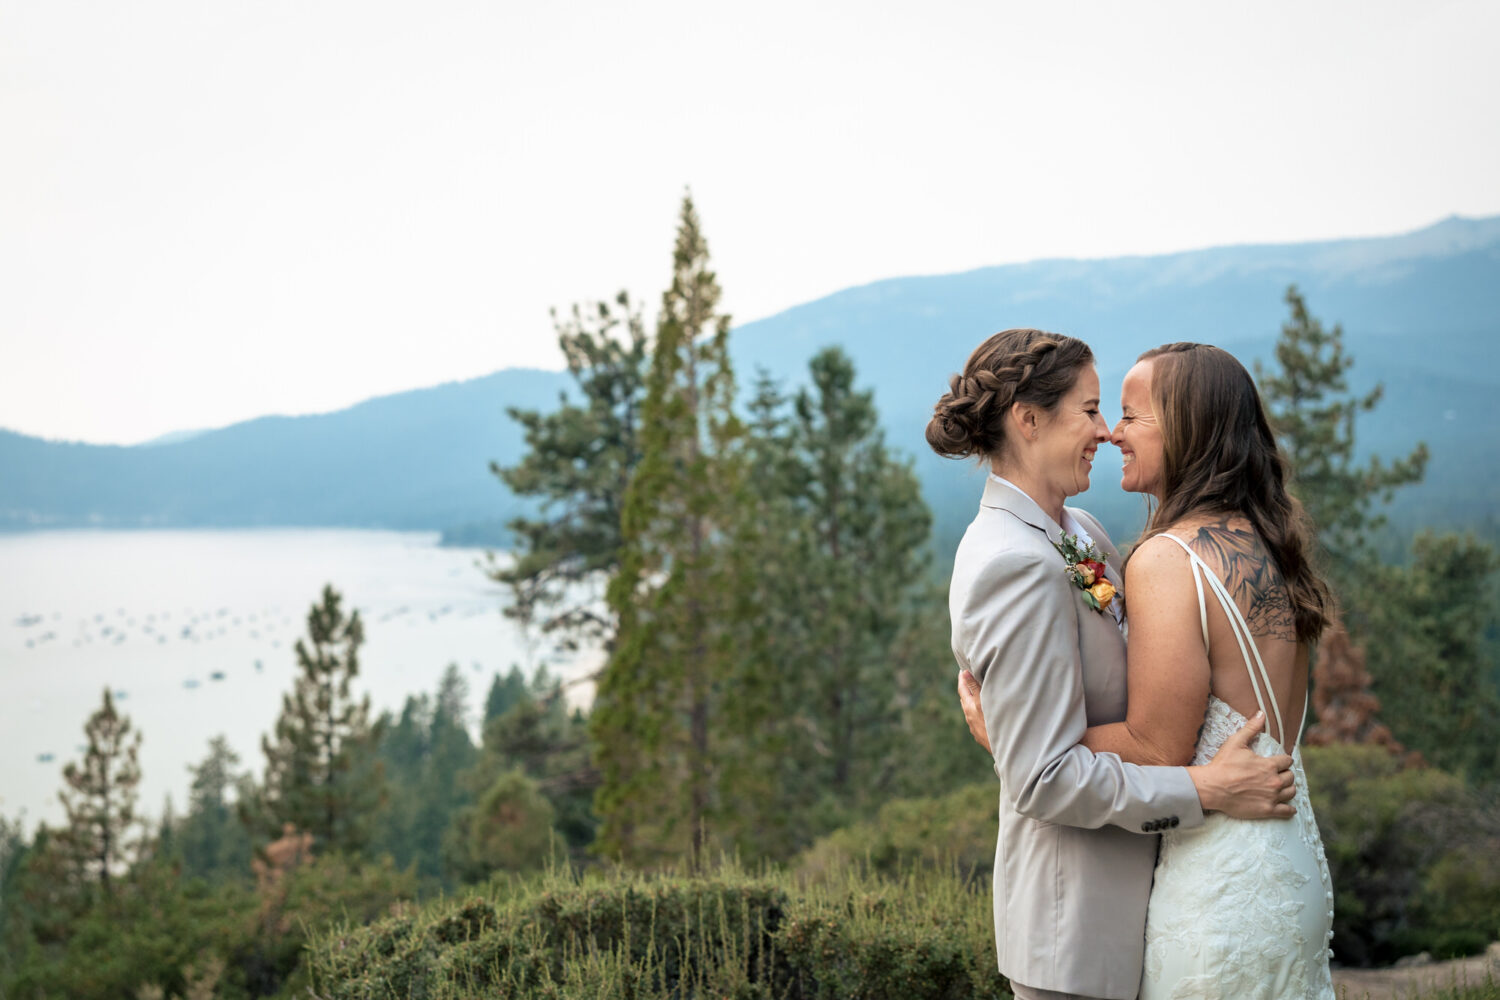 Two brides at their wedding venue overlooking Lake Tahoe.